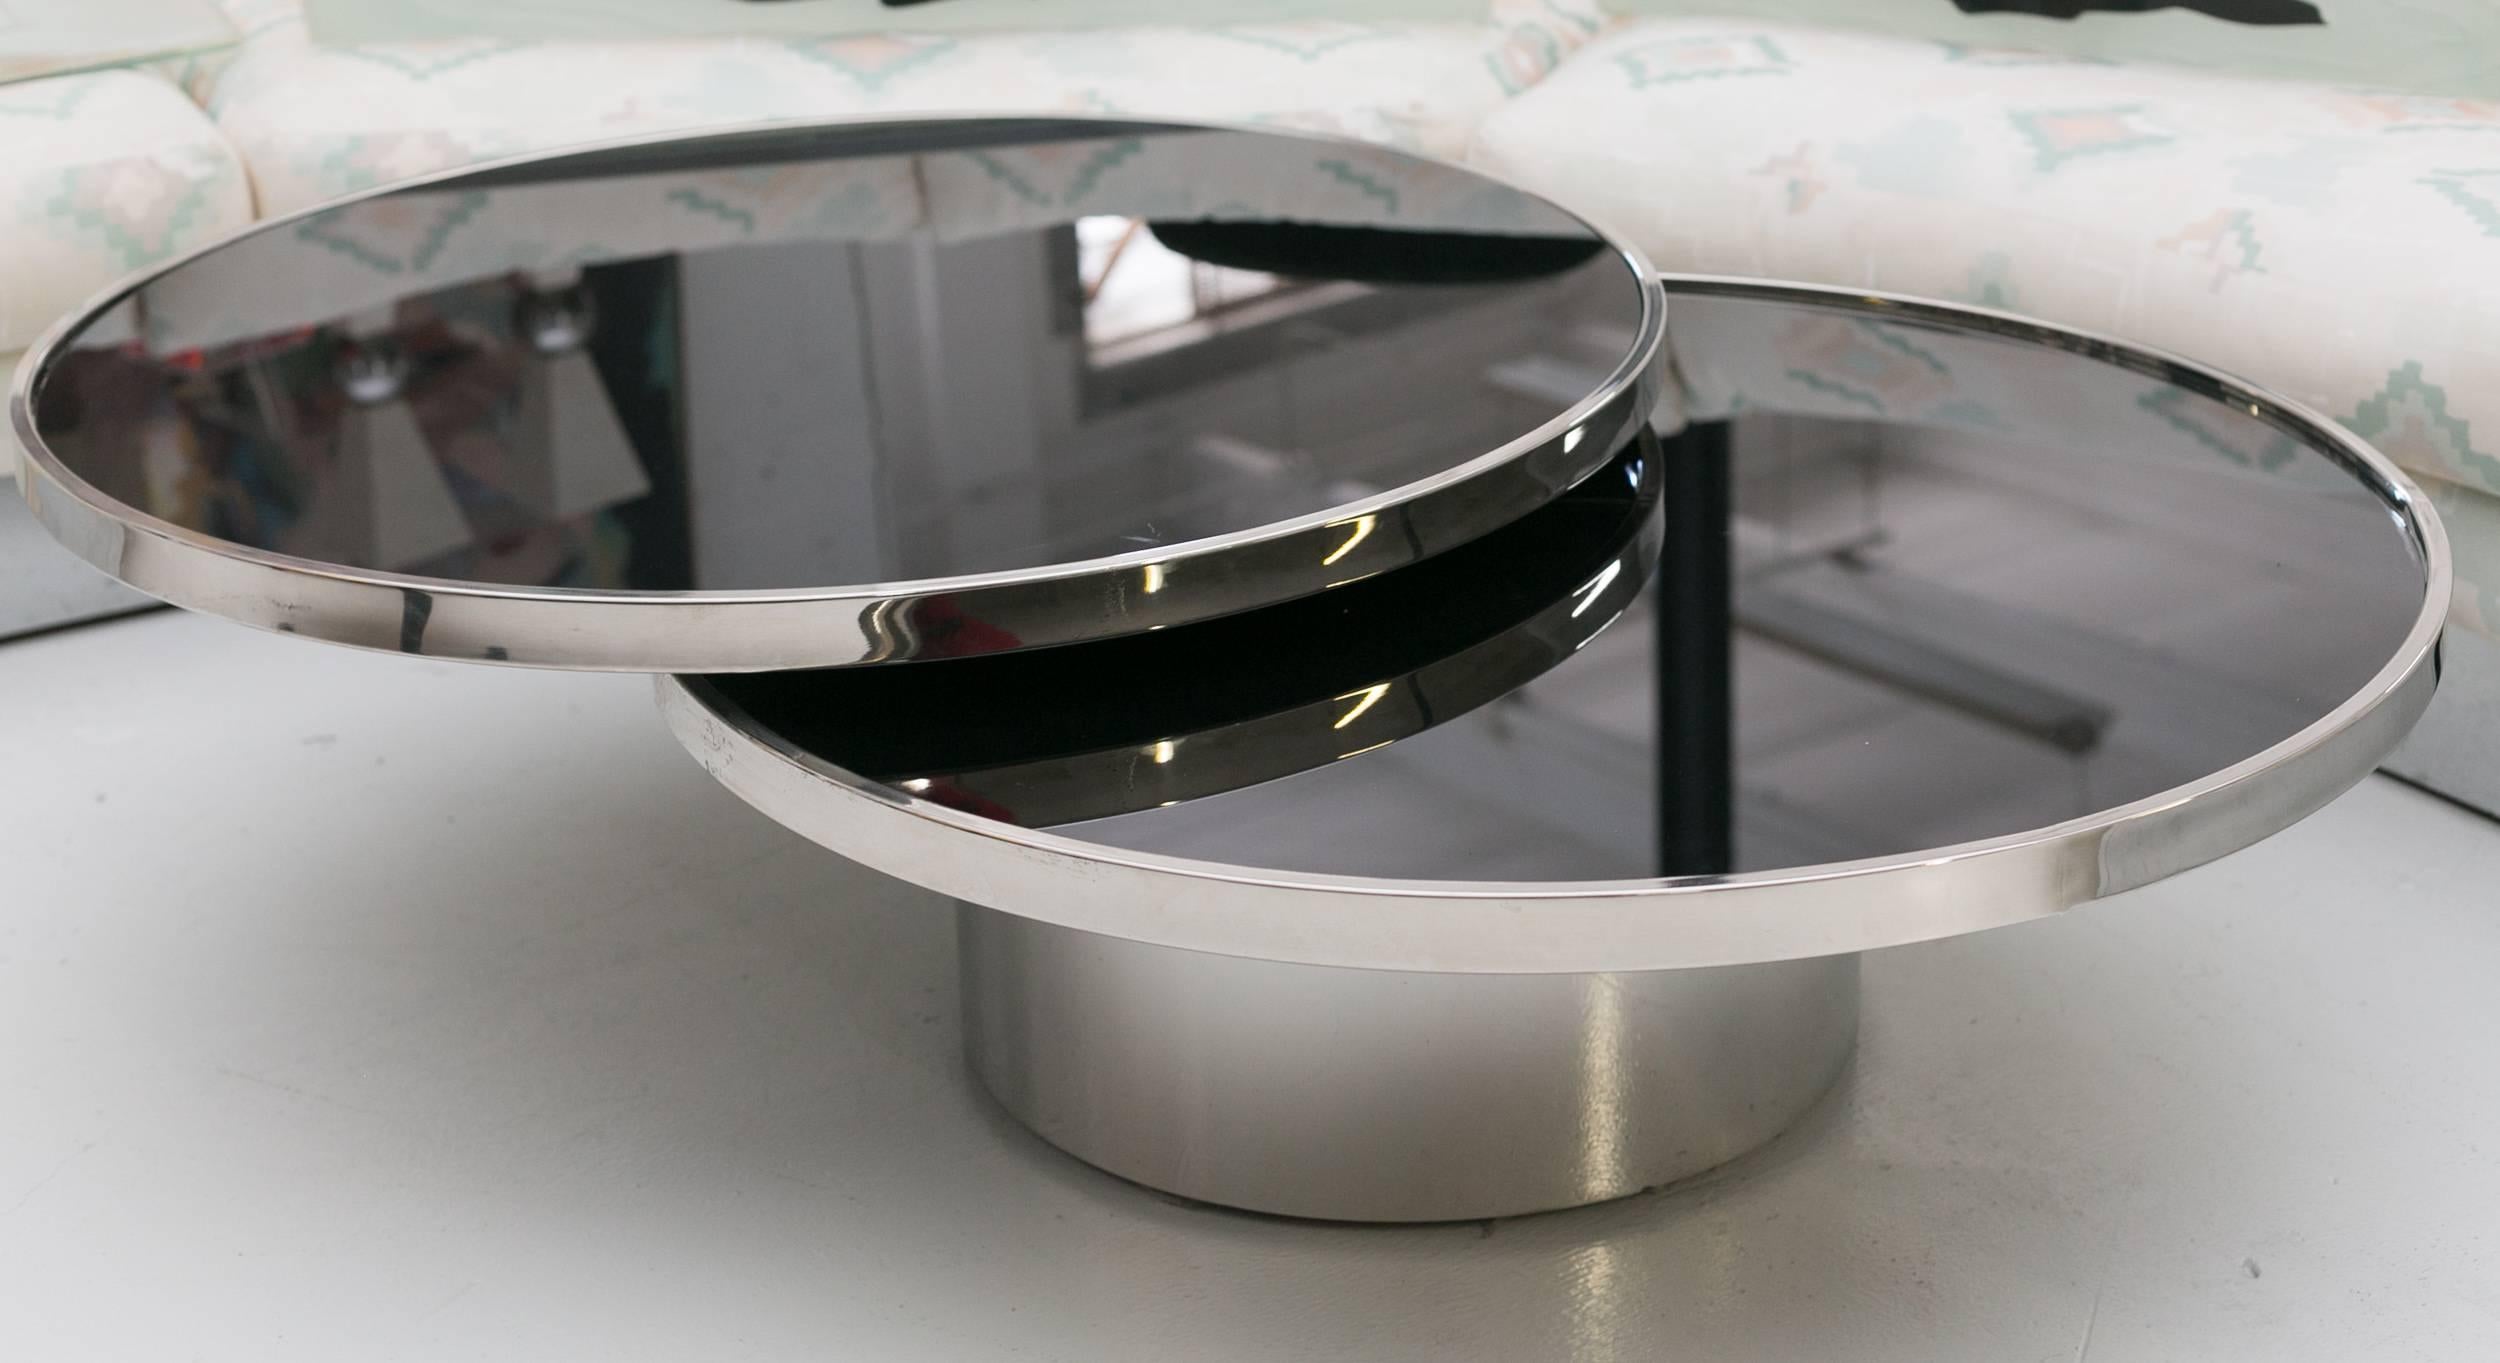 Revolving Cocktail table by Milo Baughman
with black back painted glass tops 
and mirror finished stainless 
steel rings and base.
Displayed @ Entrepot, Miami.
By appointment only.